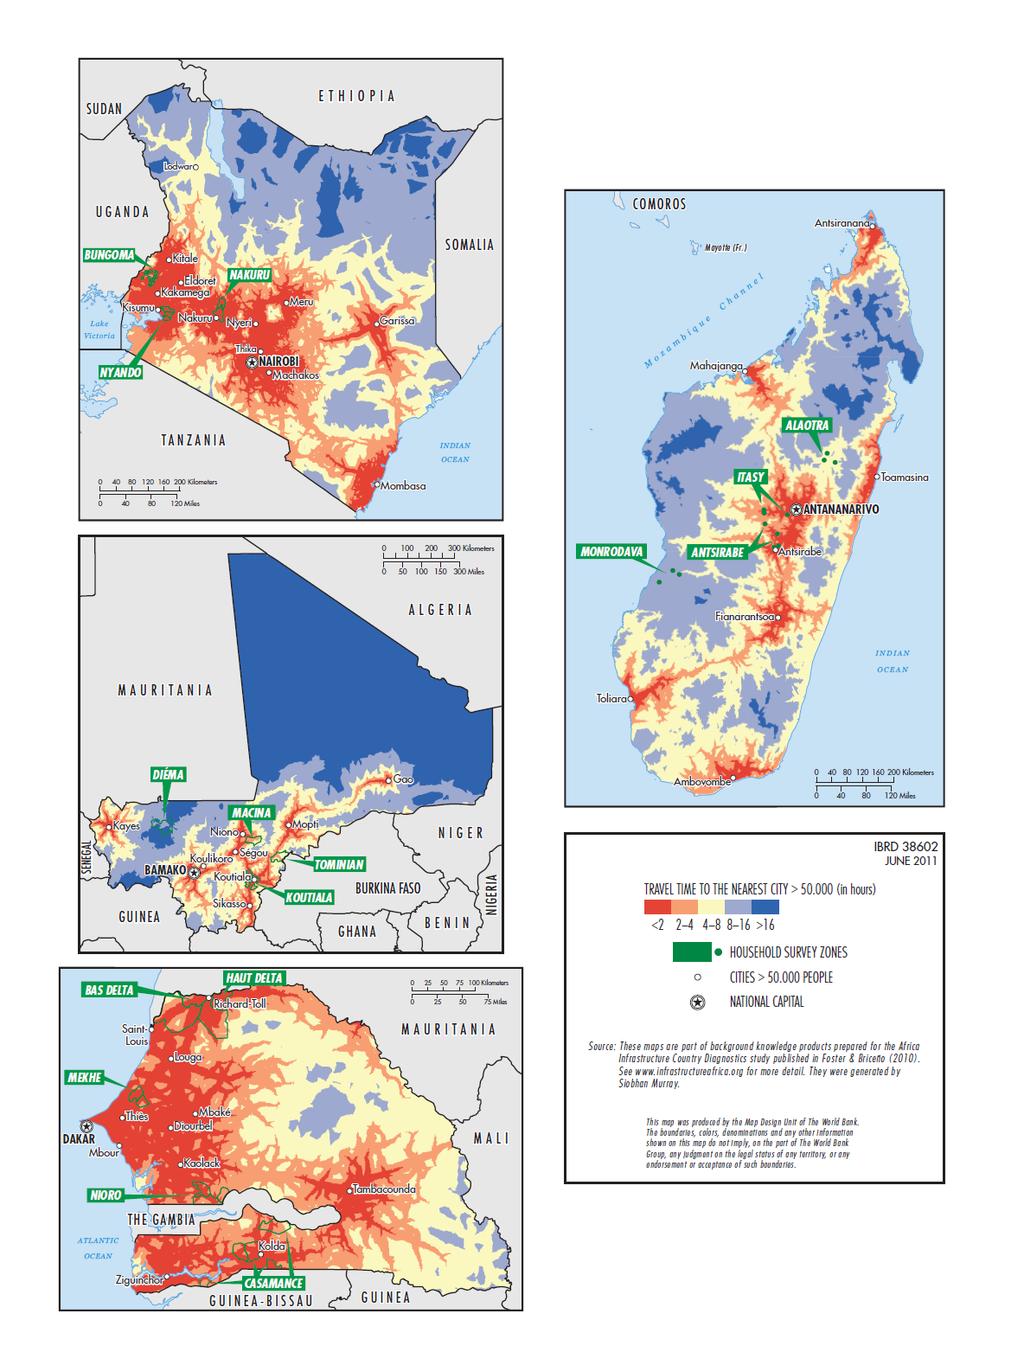 Market Access in SSA (Travel times to the nearest city of 50,000) Densities are not enough